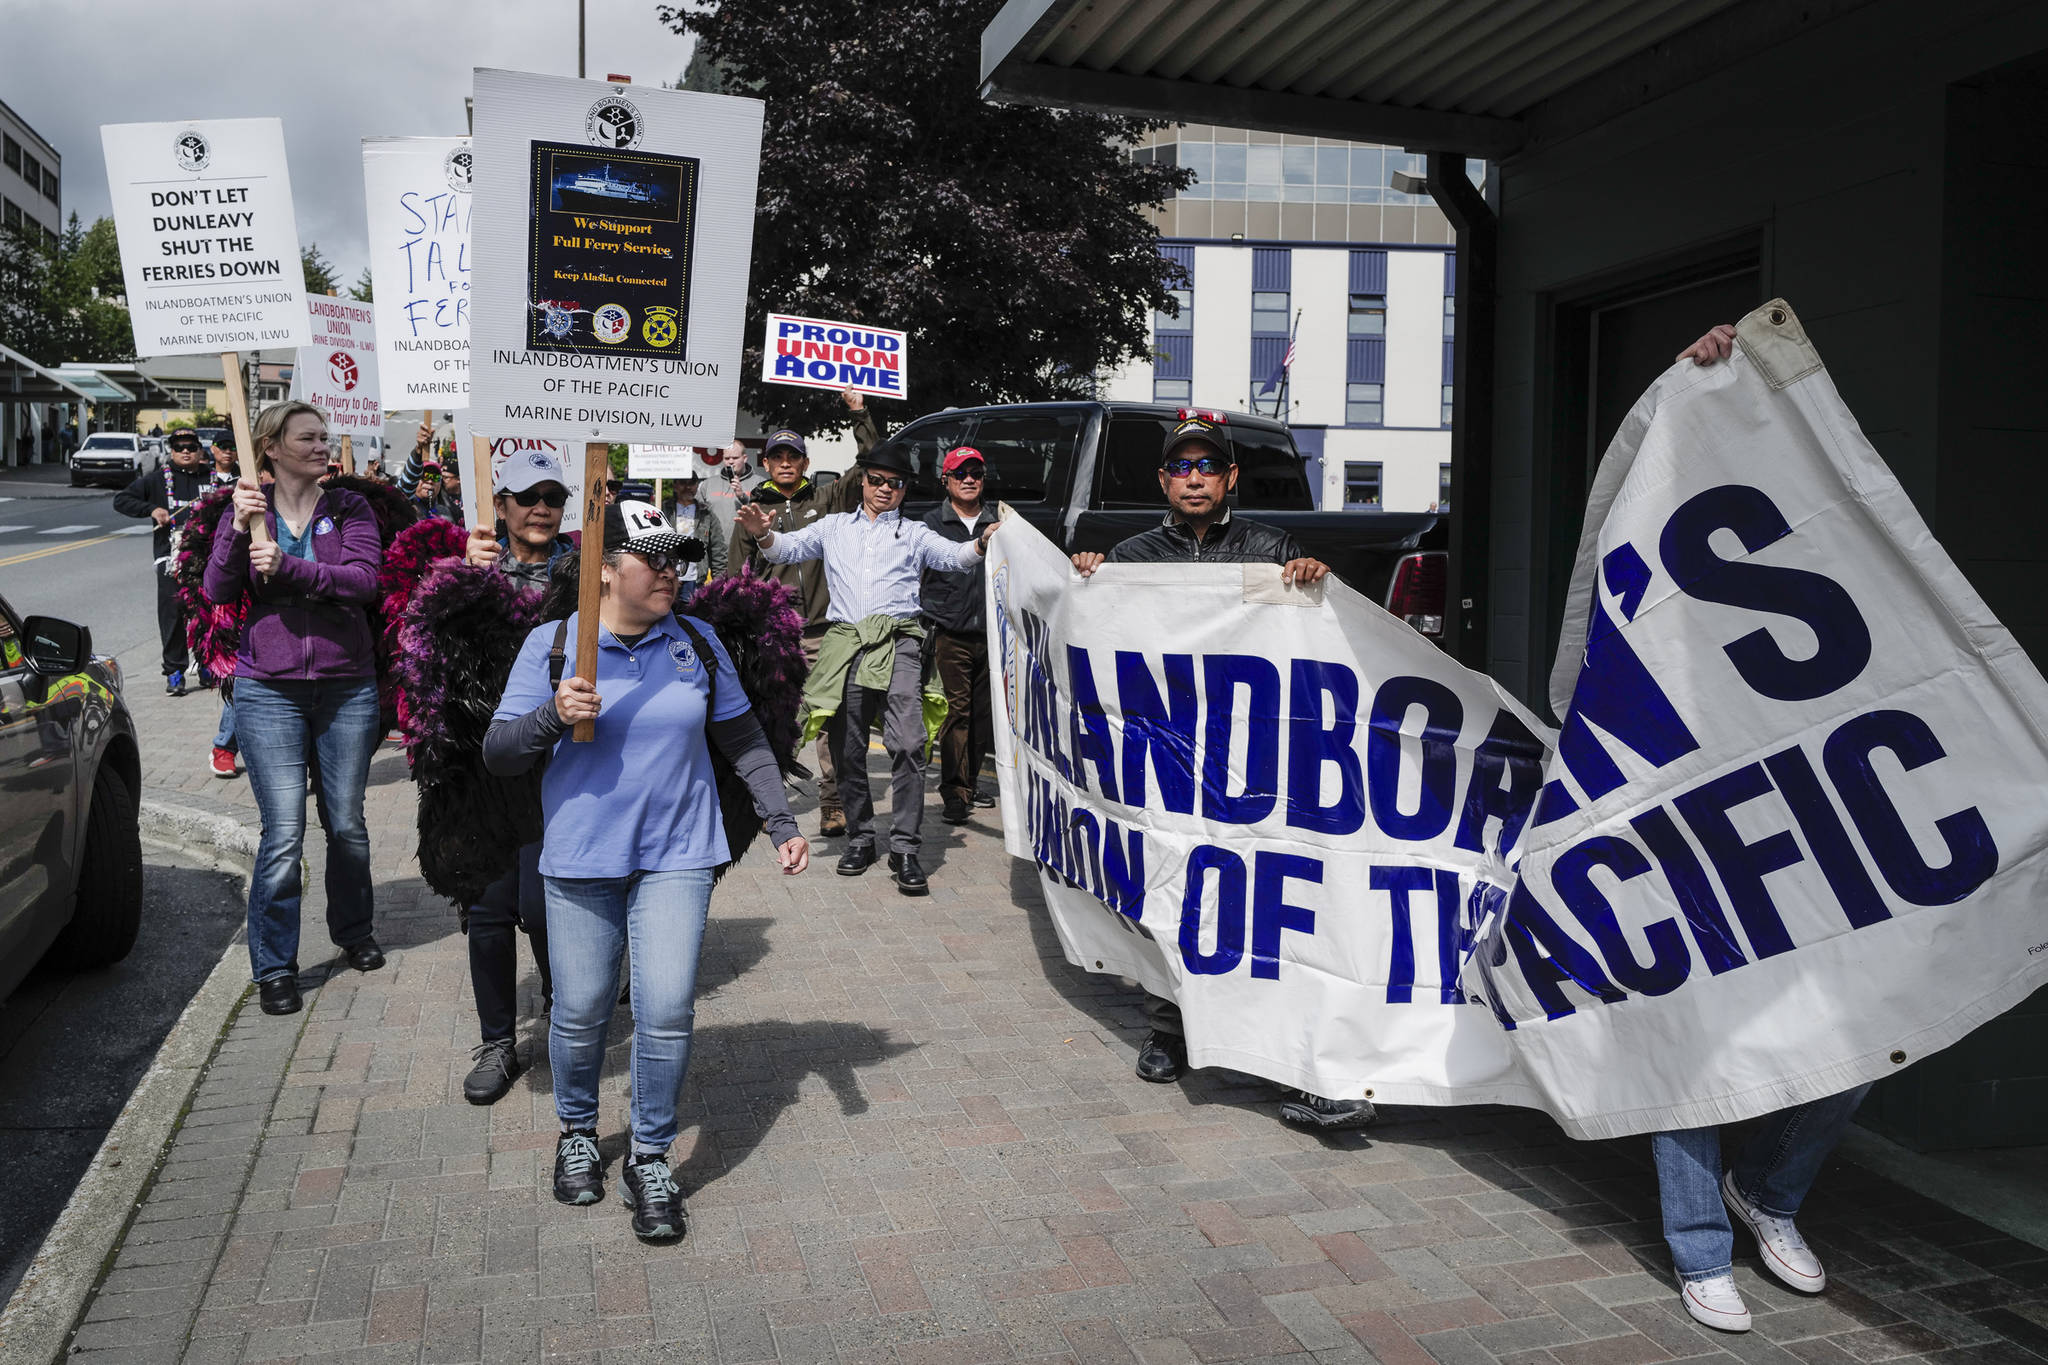 Backed by members of the Juneau Filipino community’s Ati-Atihan musical group, members of the Inland Boatmen’s Union of the Pacific march along Main Street in support of their continued strike against the Alaska Marine Highway System on Monday, July 29, 2019. (Michael Penn | Juneau Empire)